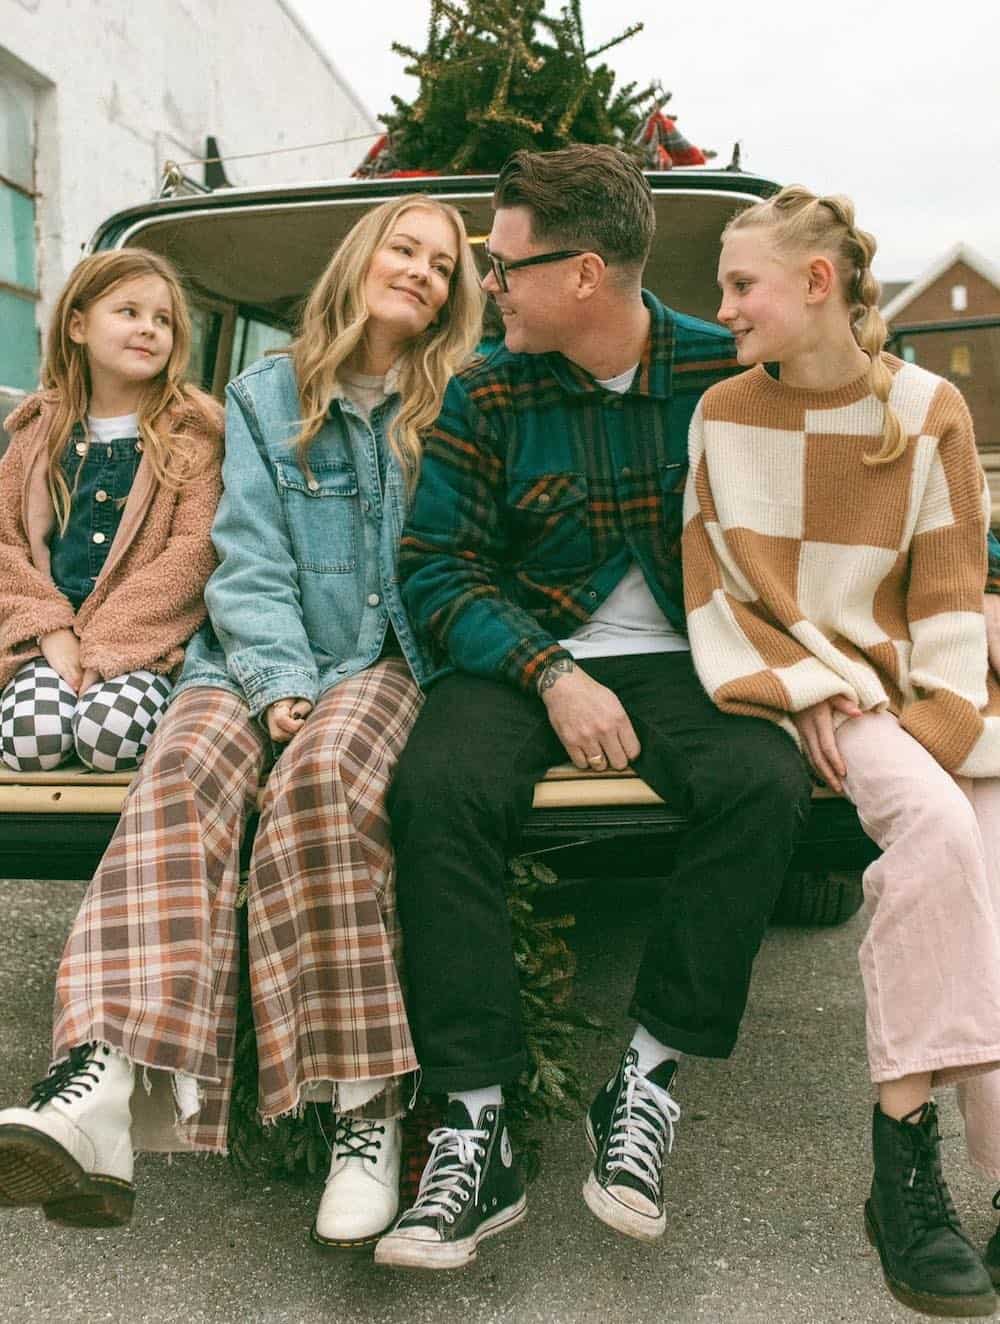 a winter family photoshoot with outfits featuring plaid, checkerboard, flannel, and other retro-inspired styles